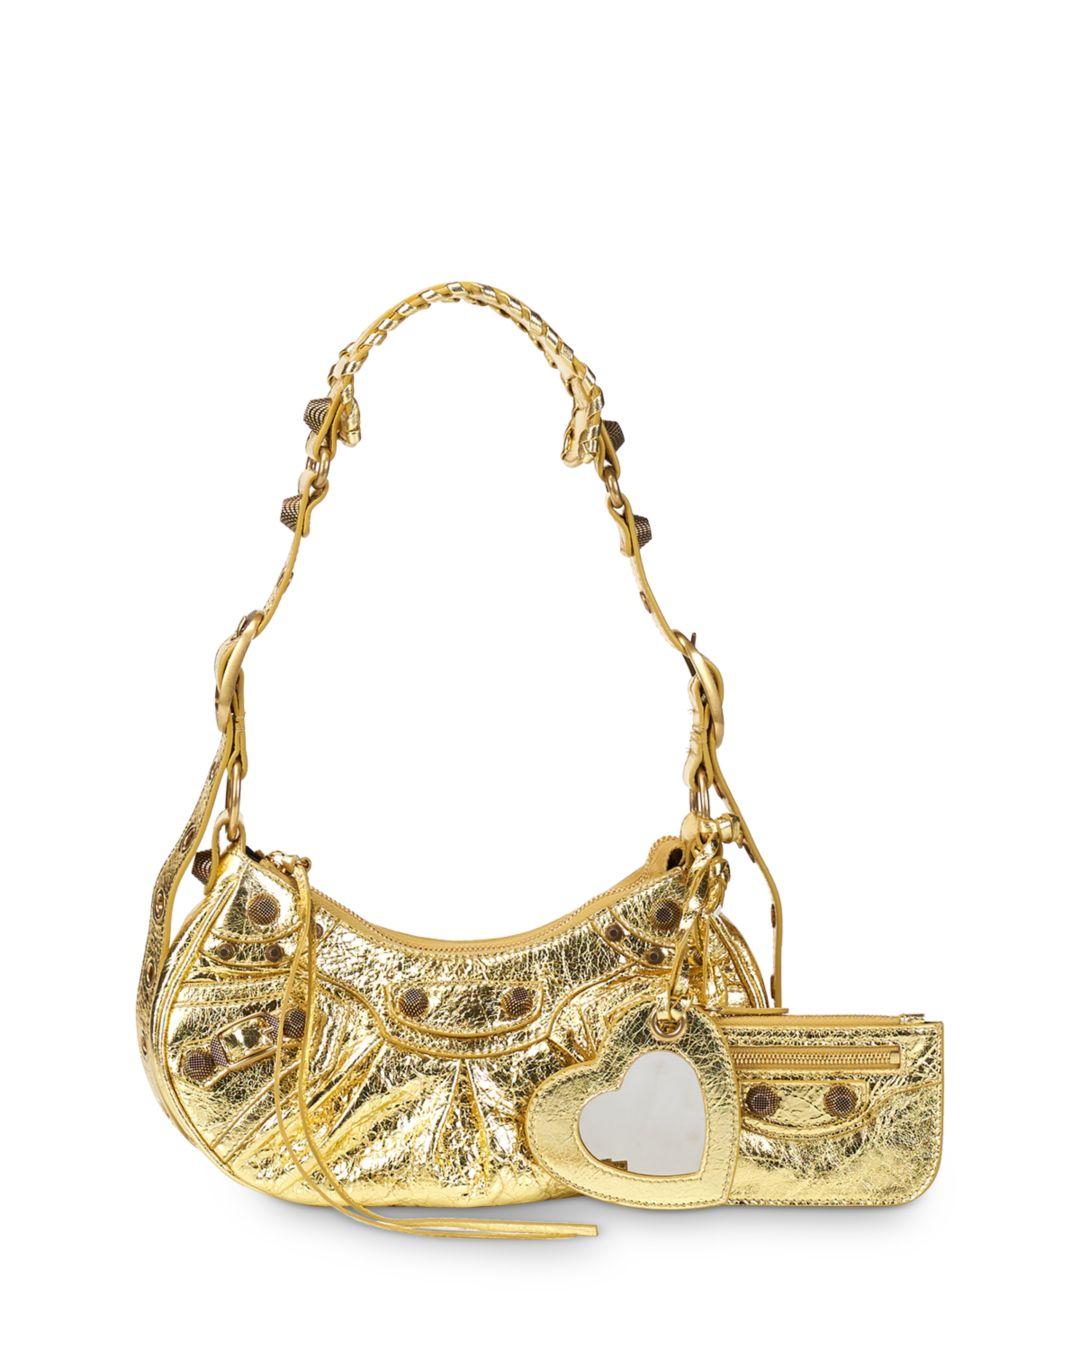 Balenciaga Leather Le Cagole Xs Shoulder Bag in Gold/Gold (Metallic) | Lyst